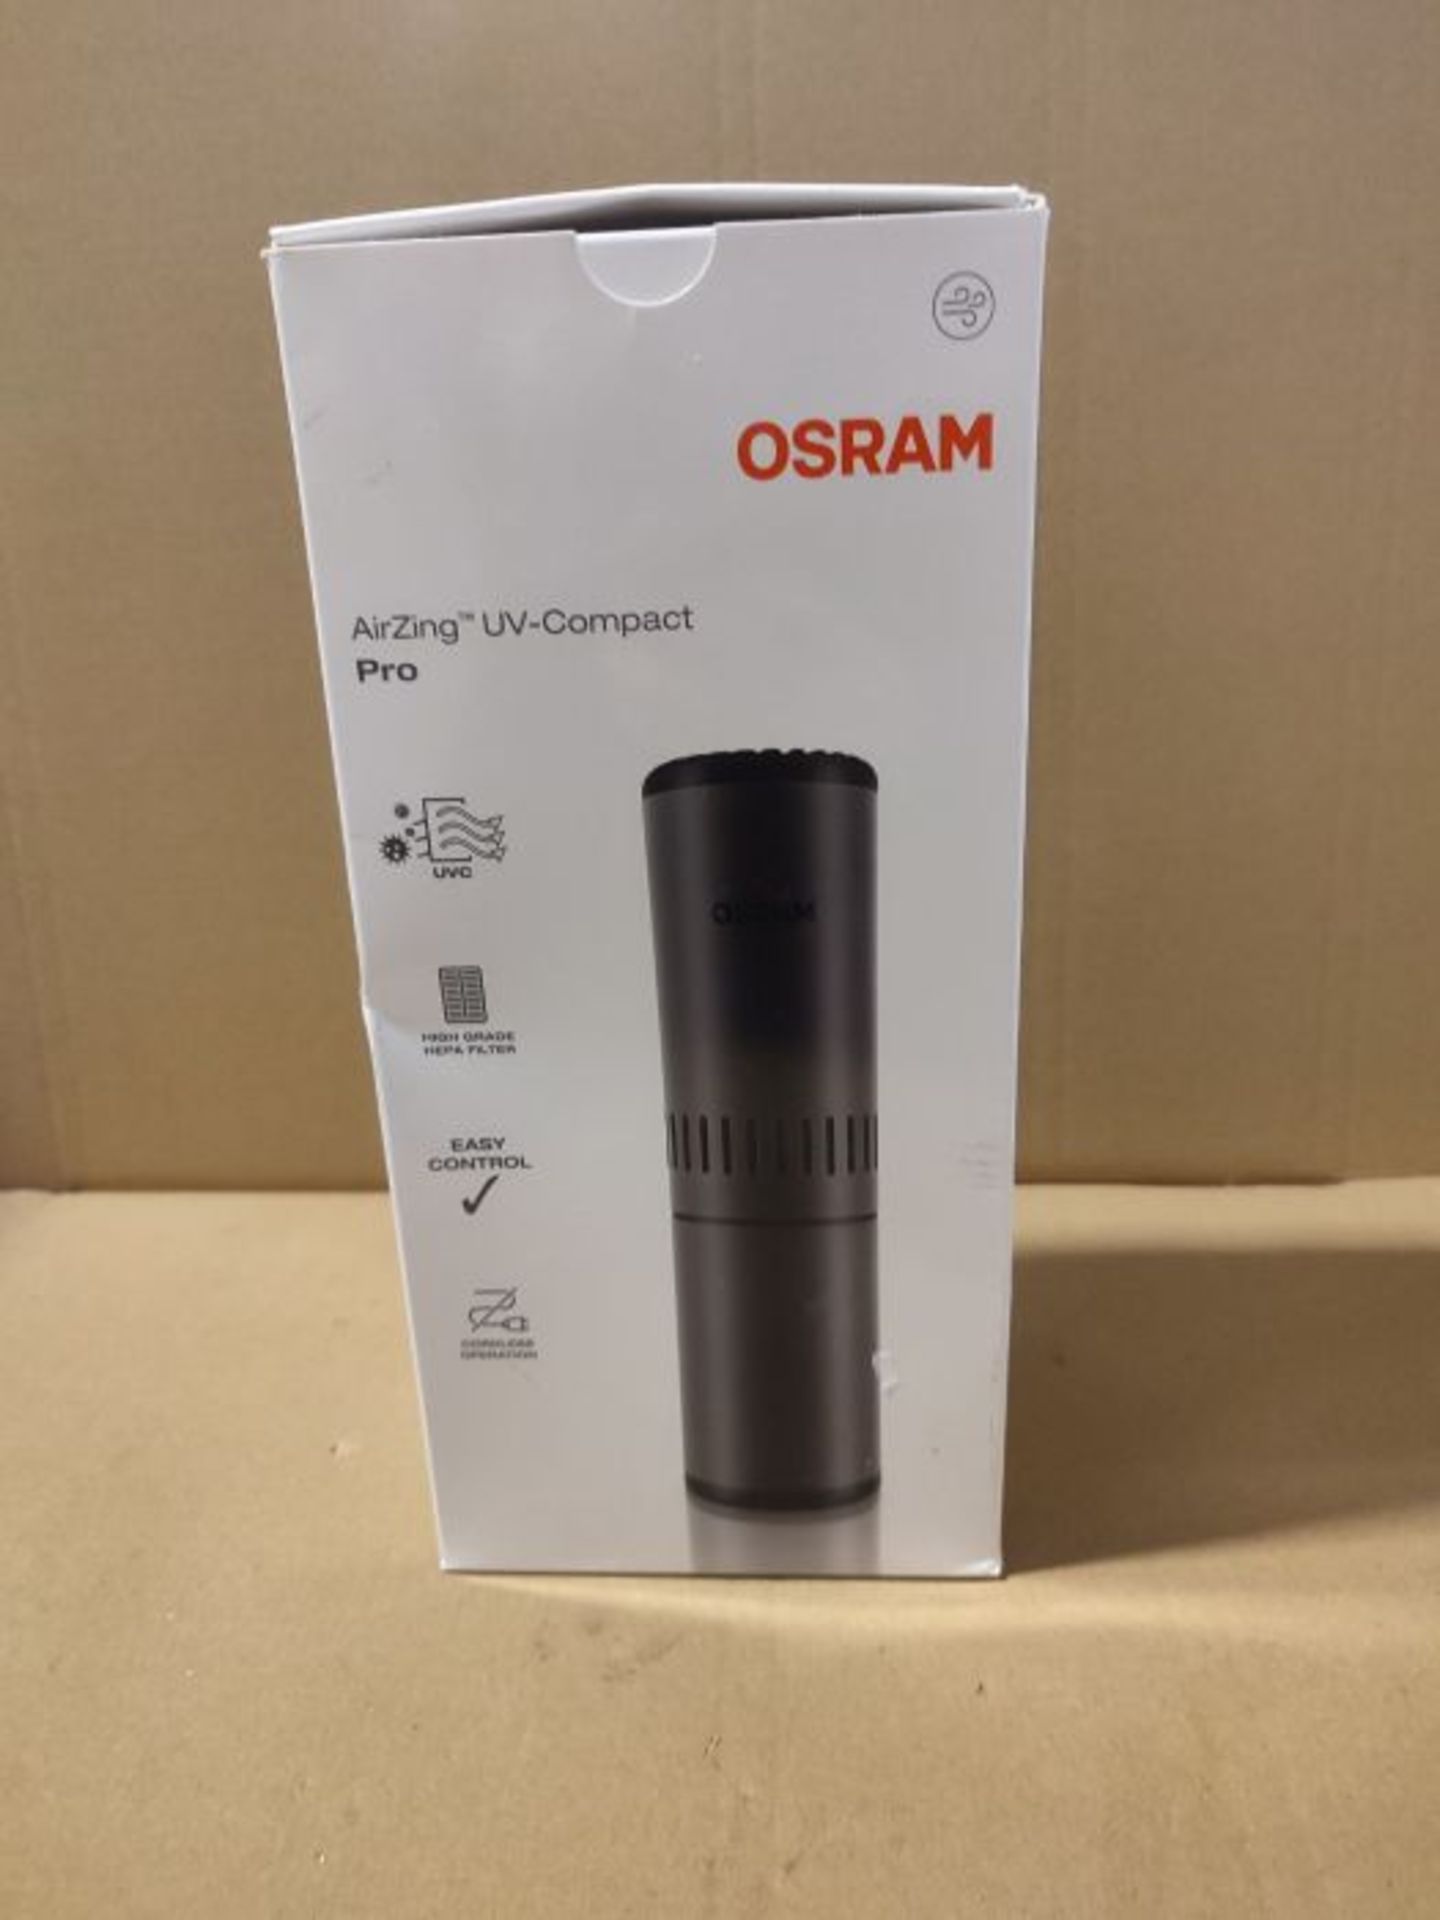 RRP £175.00 OSRAM UVCOMPACTPRO AirZing Compact Pro Portable 2 in 1 air Purification and Filtration - Image 2 of 3